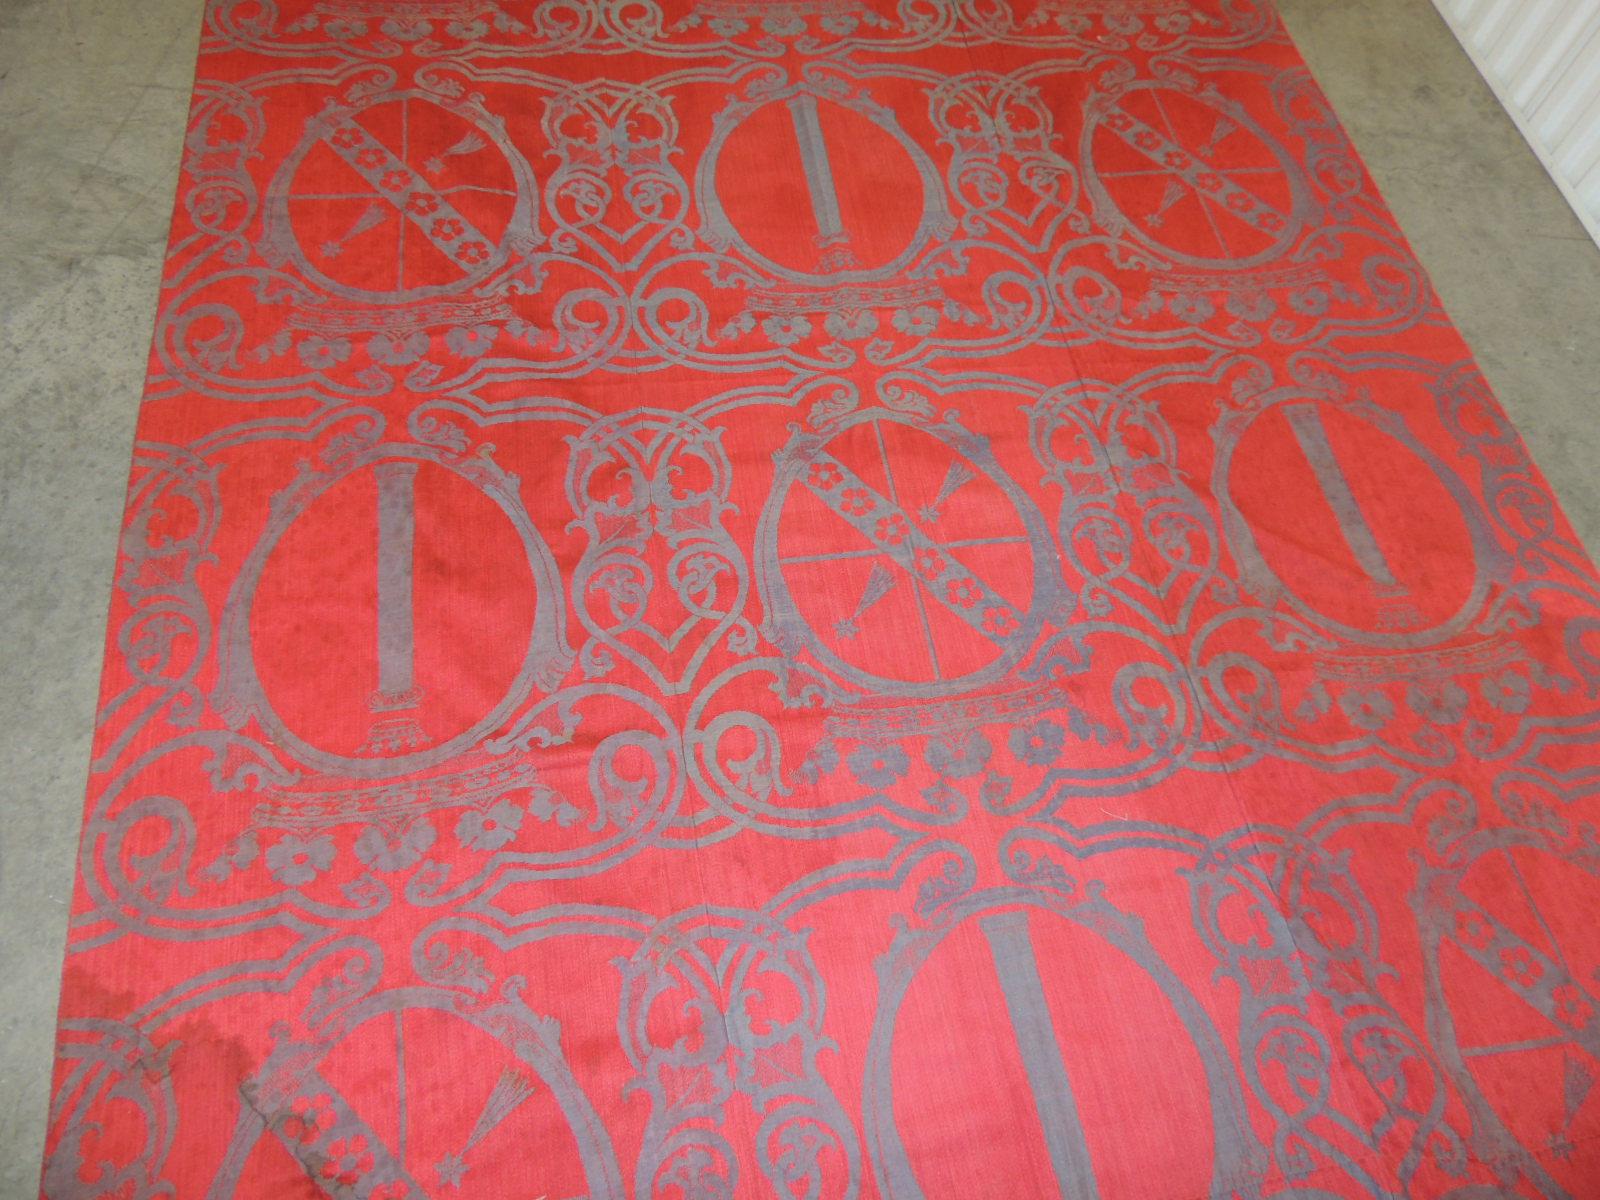 Hand-Crafted Large Scale Grey and Red Woven Textile Panel